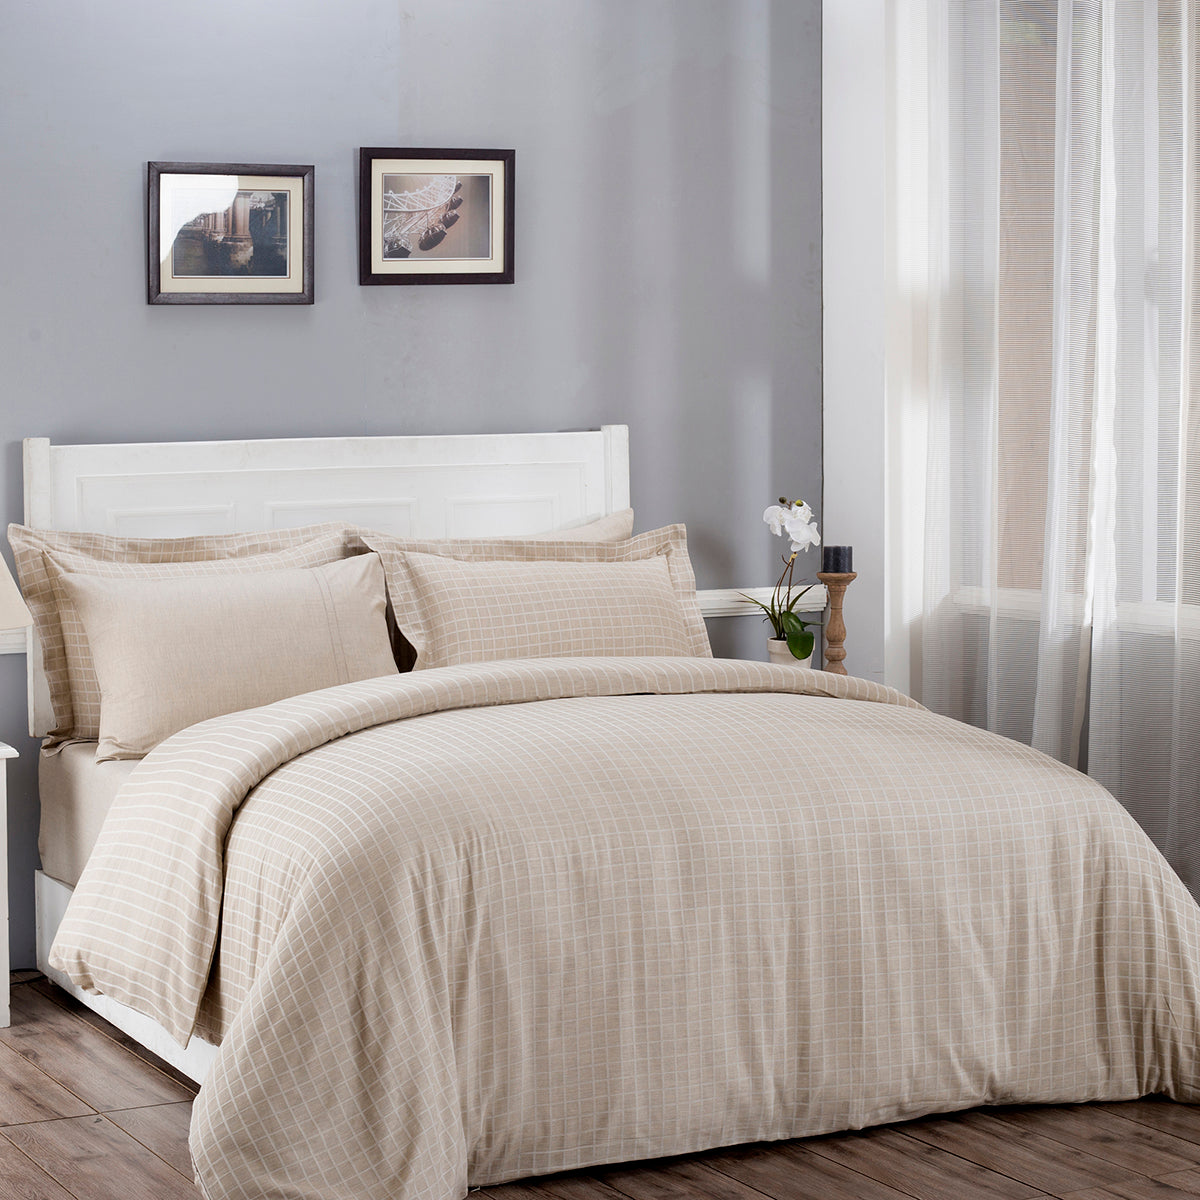 Bliss Reversible Made With Egyptian Cotton Ultra Soft Beige Duvet Cover With Pillow Case